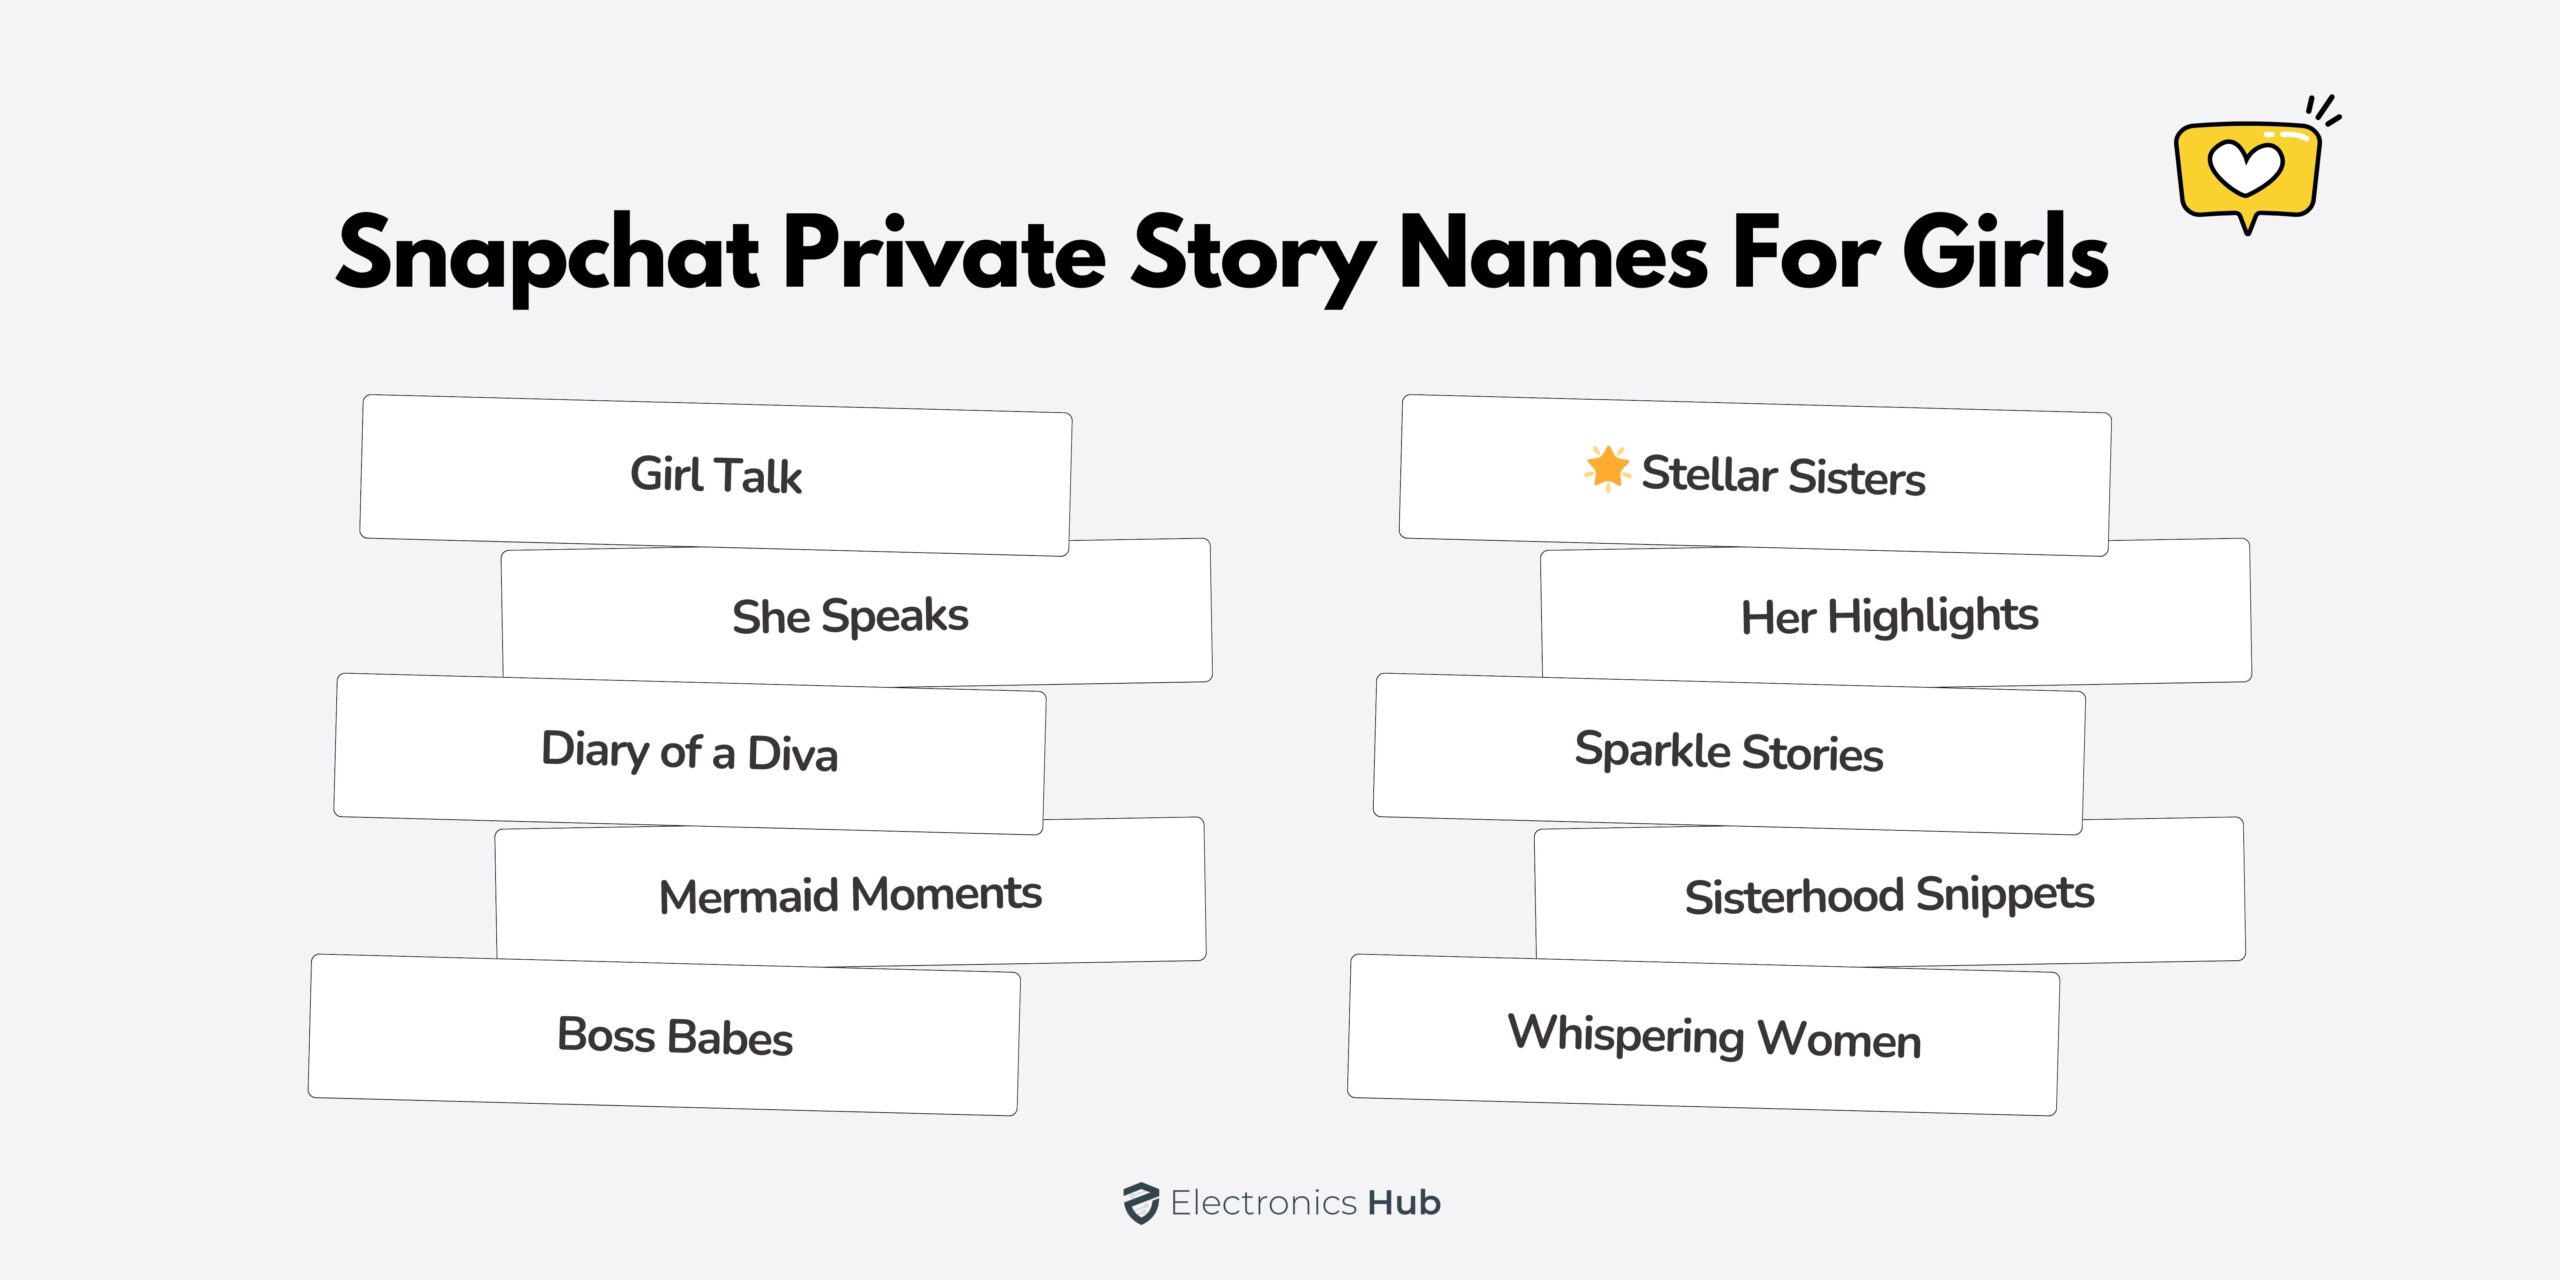 Snapchat Private Story Names for Girls